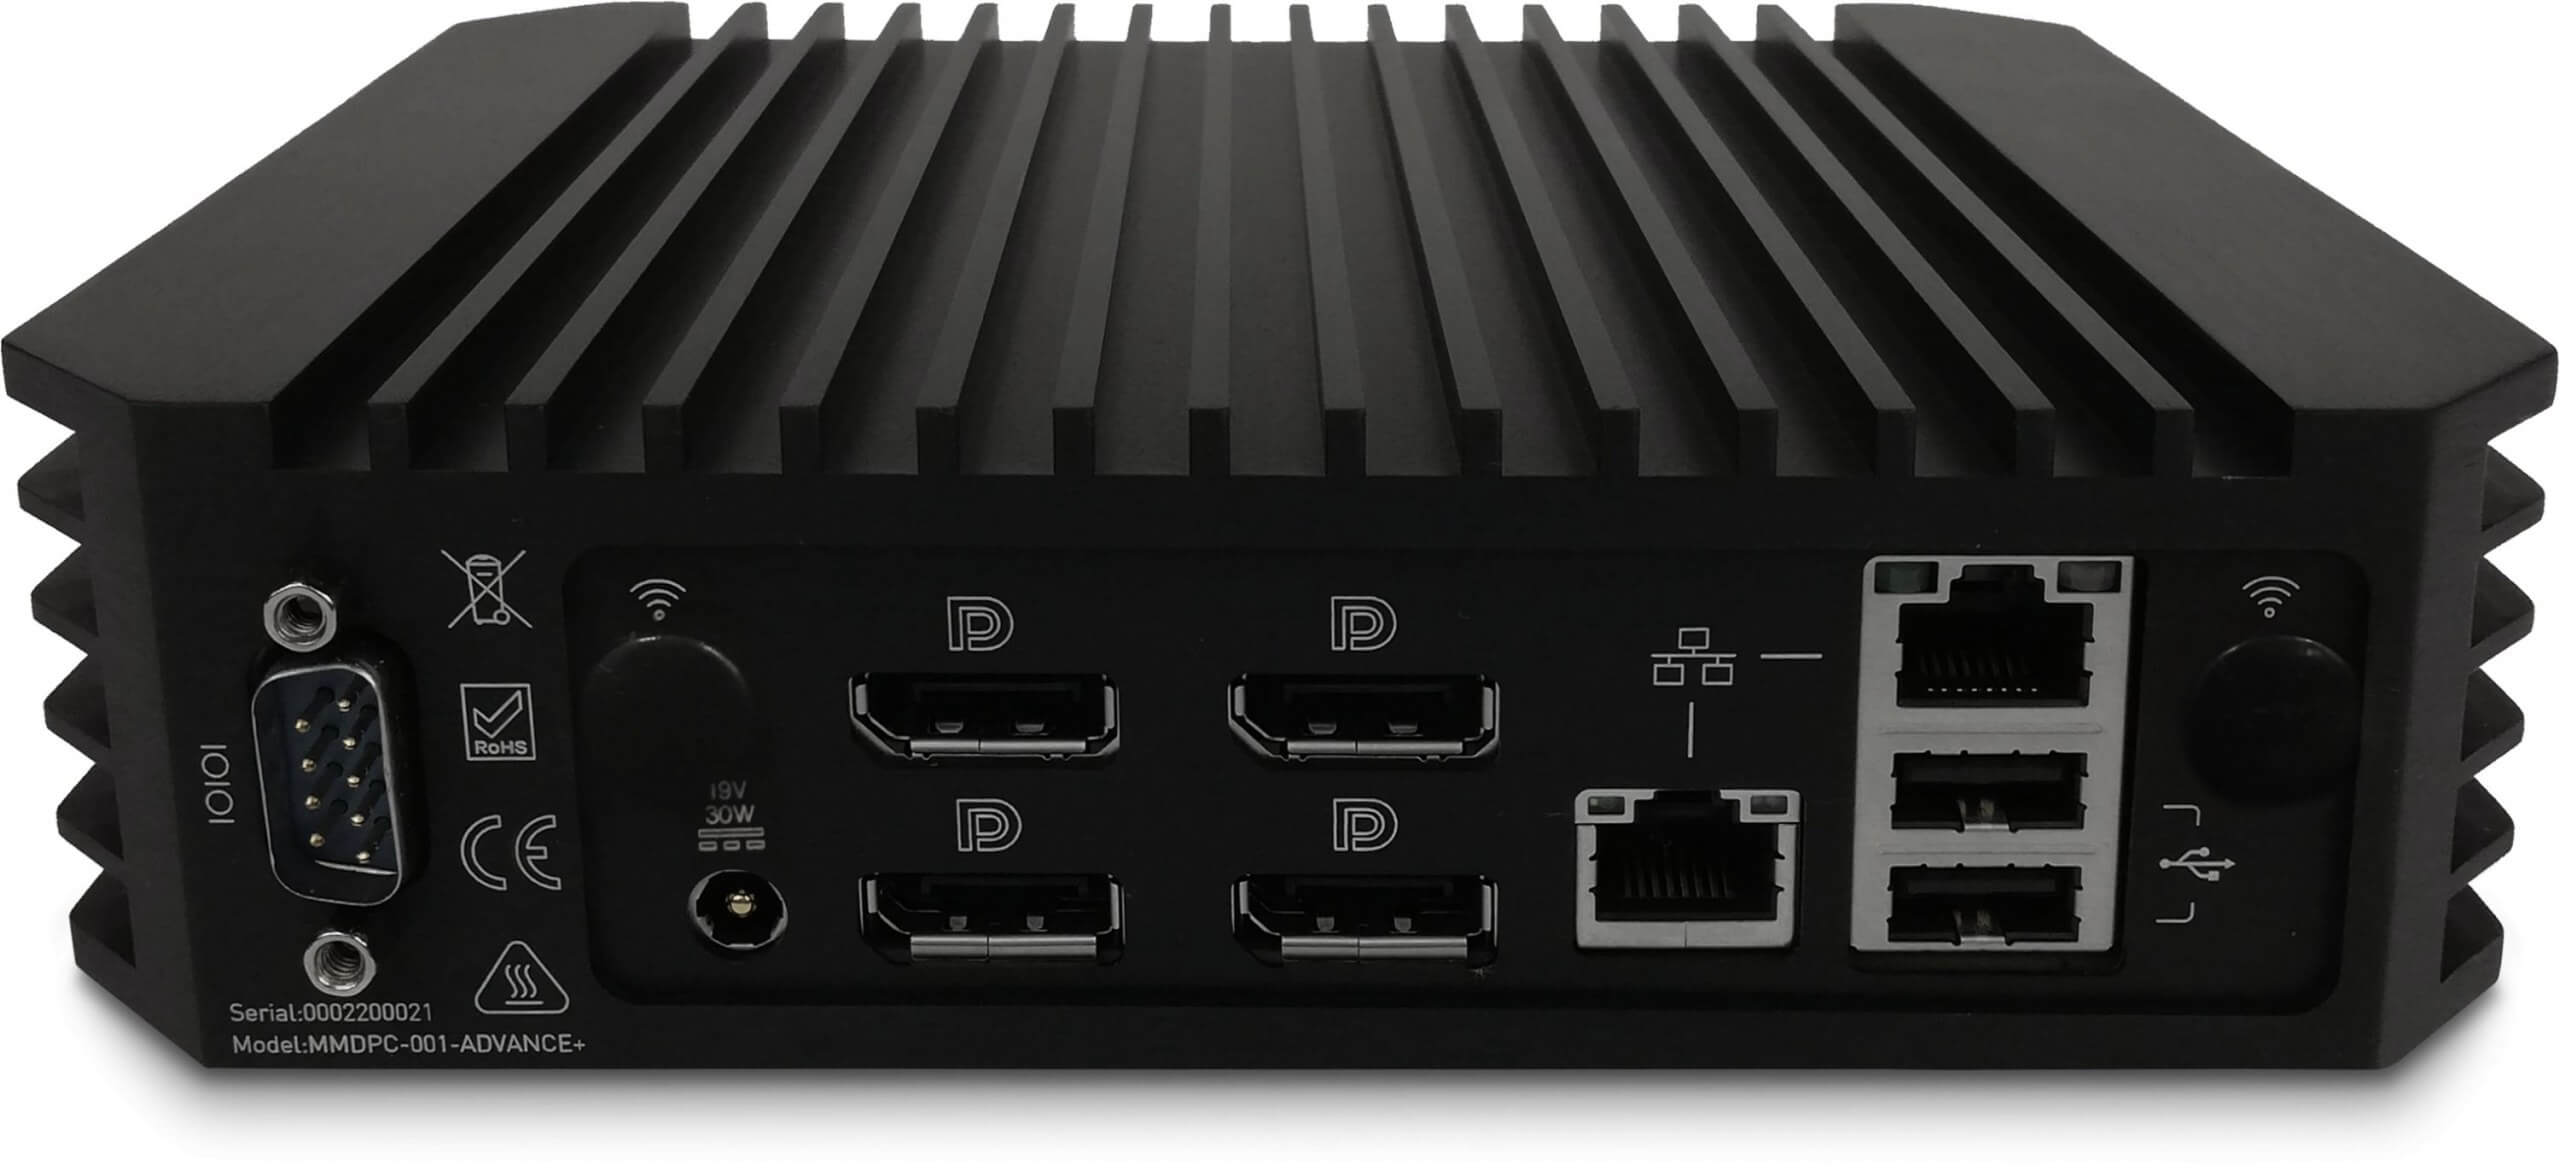 This mini PC features four 4K DisplayPort outputs and can survive being 